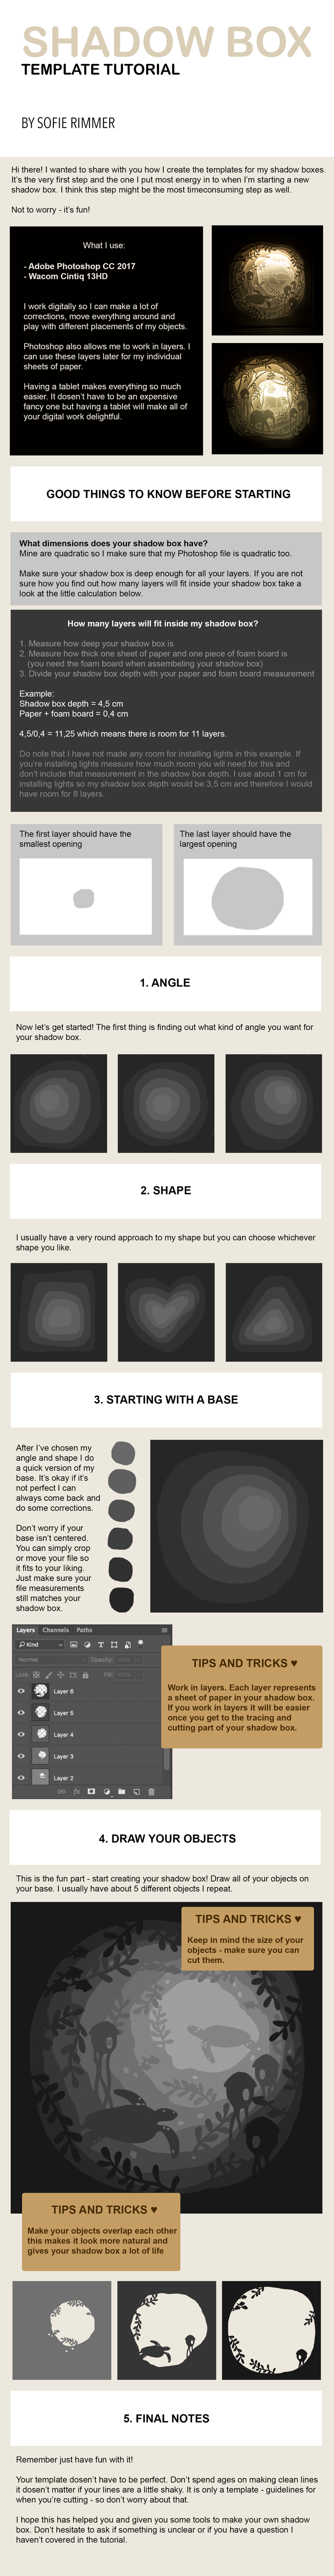 Shadow Box Template Tutorial by sofierimmer on DeviantArt